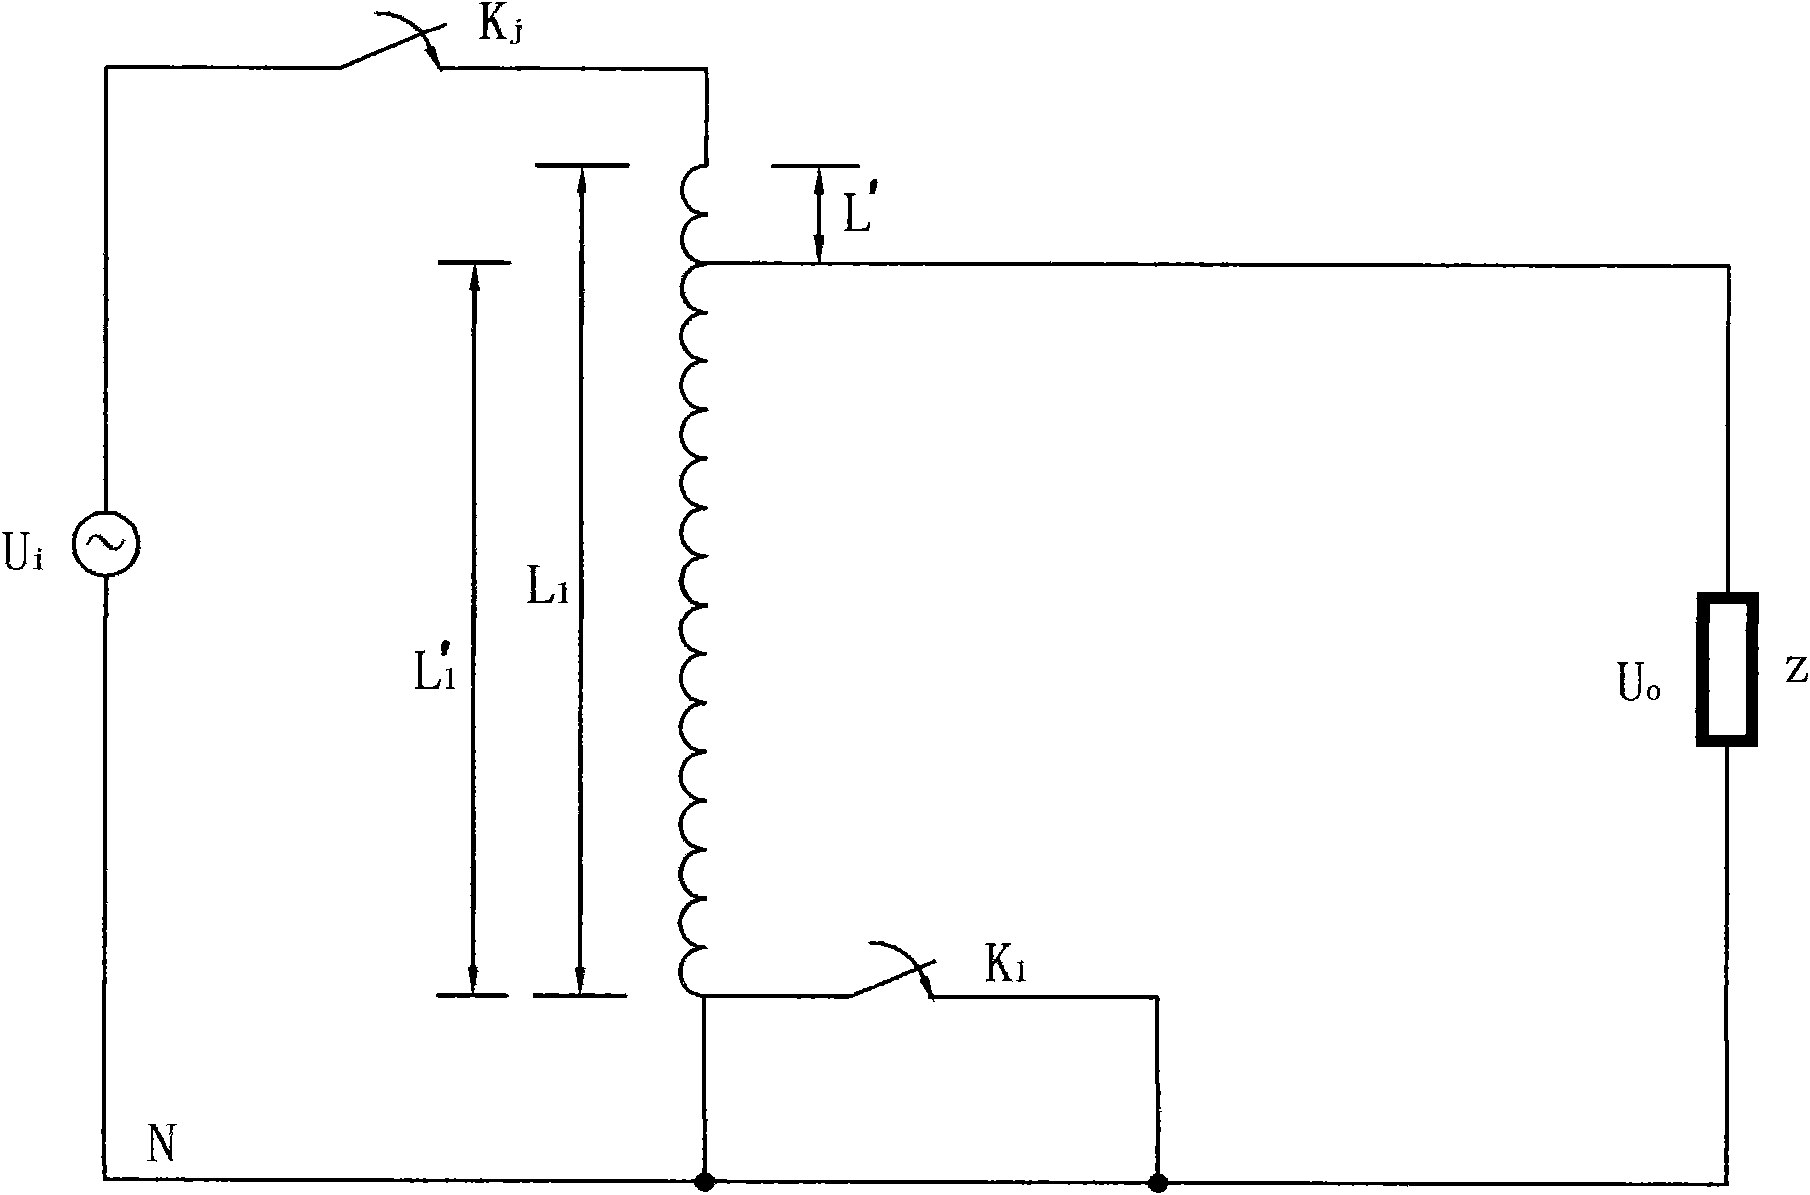 Lighting energy saving device with no flash or overvoltage on basis of logic control